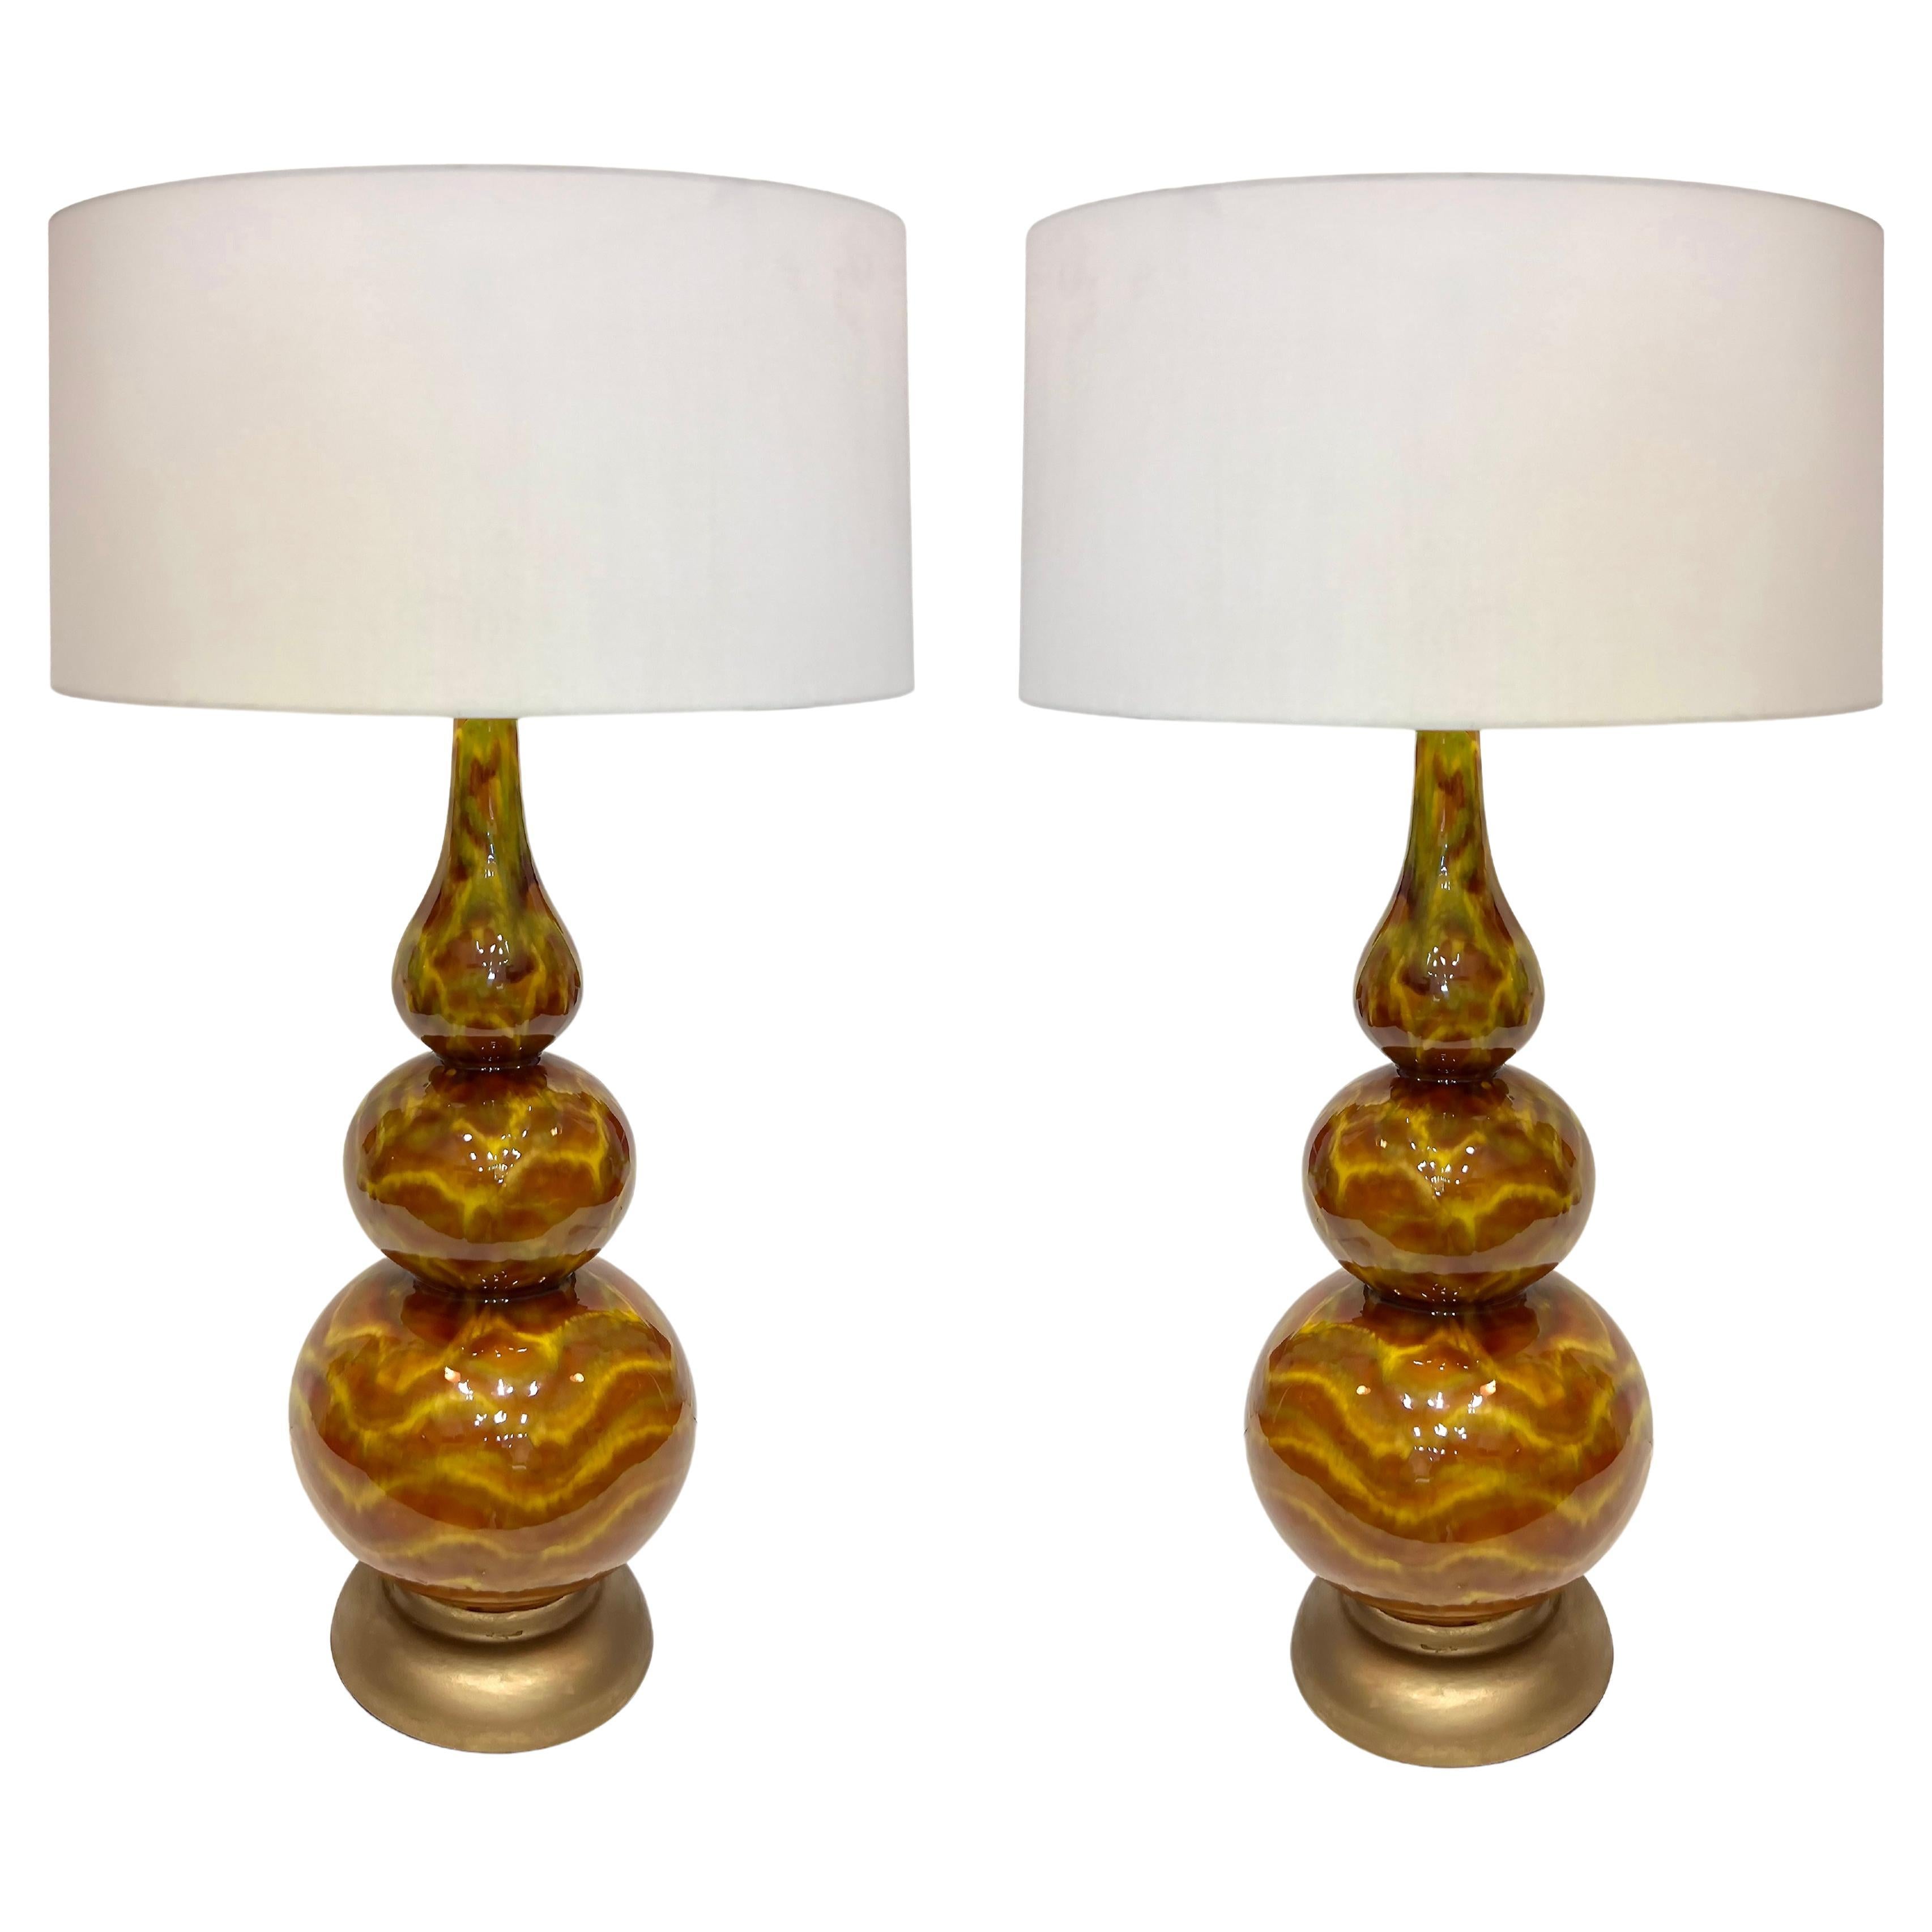 Vintage Mid-century Modern Pair of Glazed Table Lamps